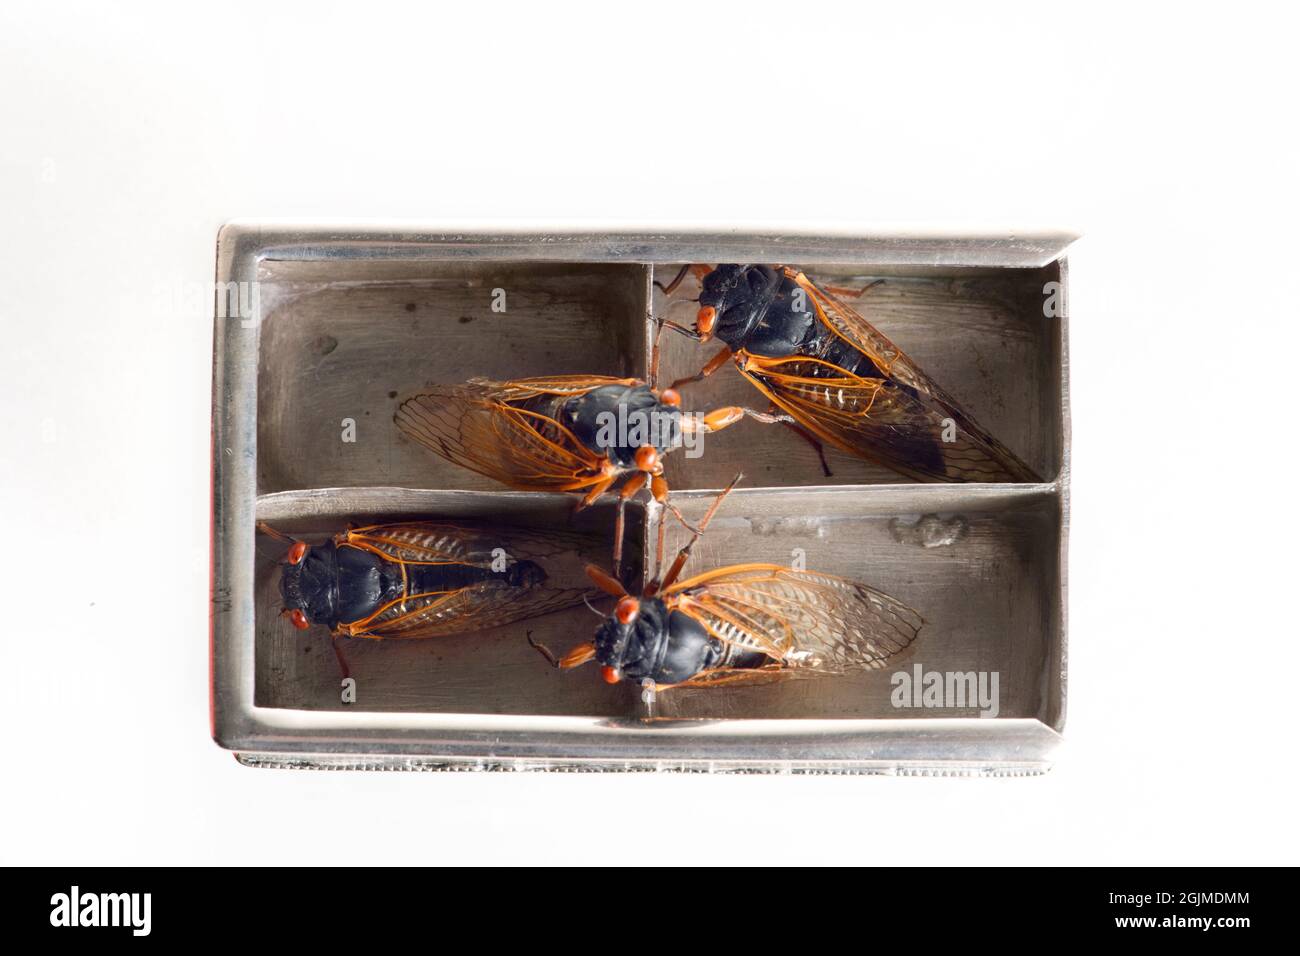 Funny studio photograph of Brood X cicadas in the four compartments of a small silver keepsake box. Stock Photo